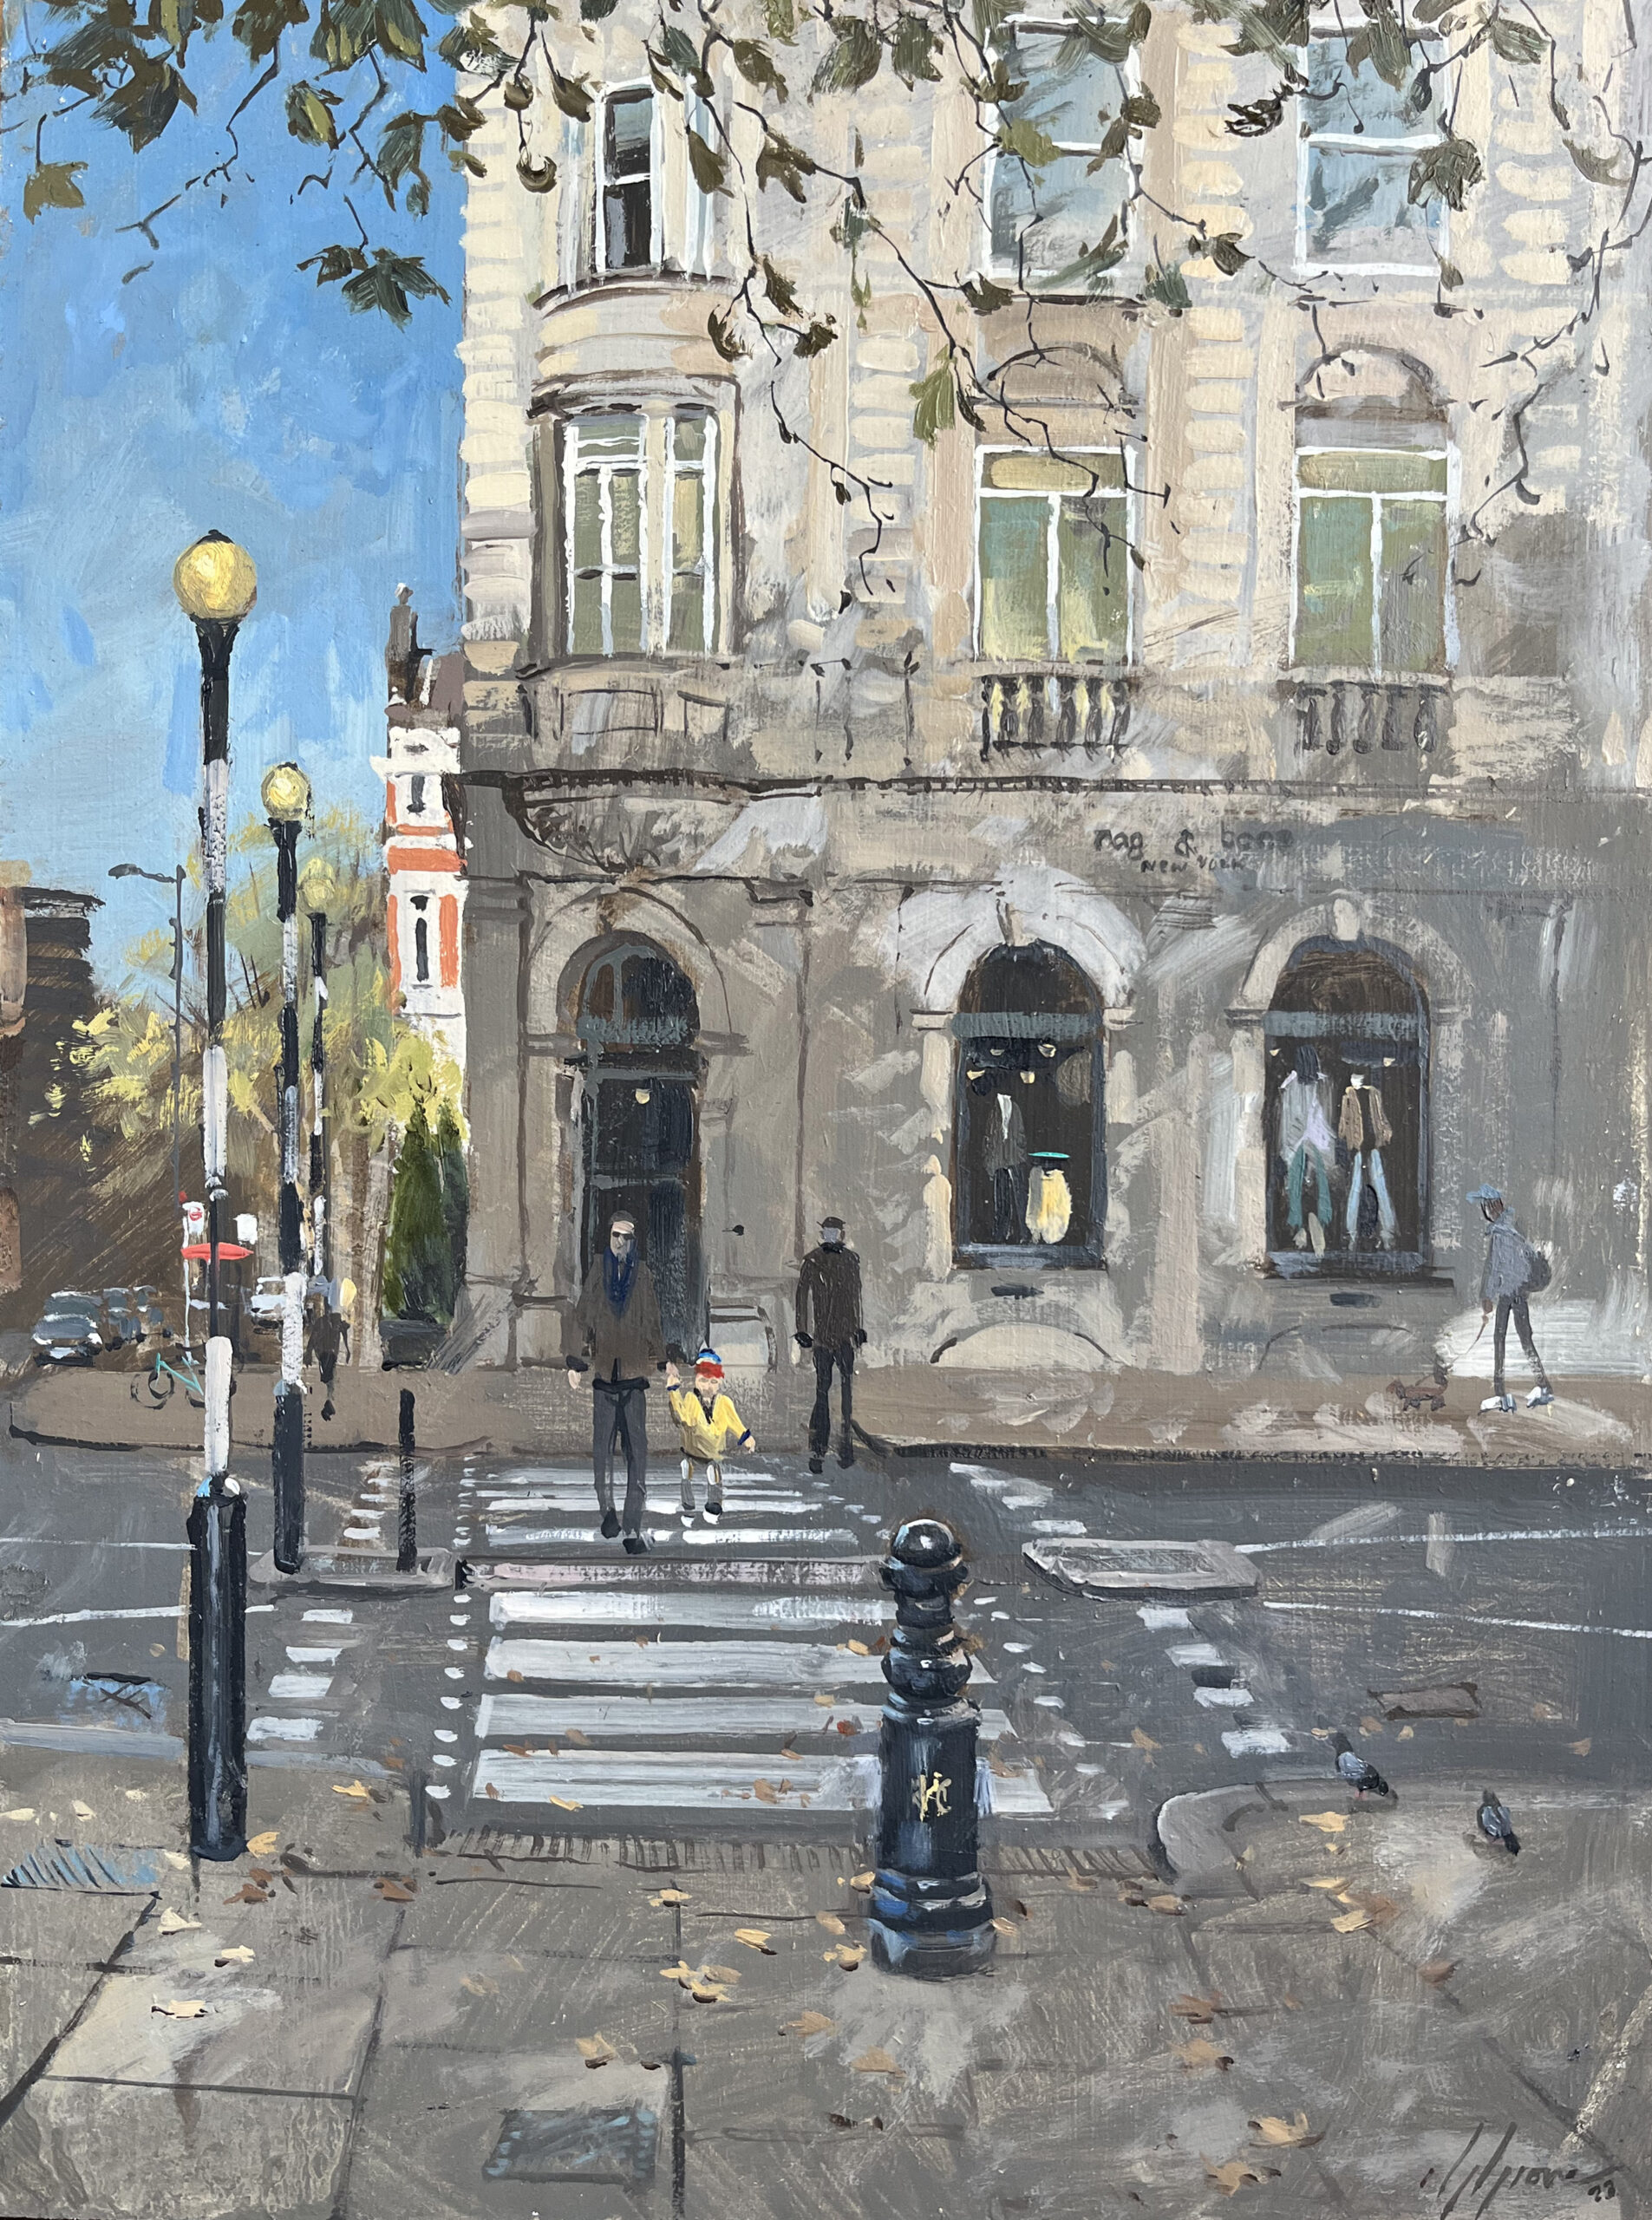 From the Shade, Sloan Square. Painting by Nick Grove.